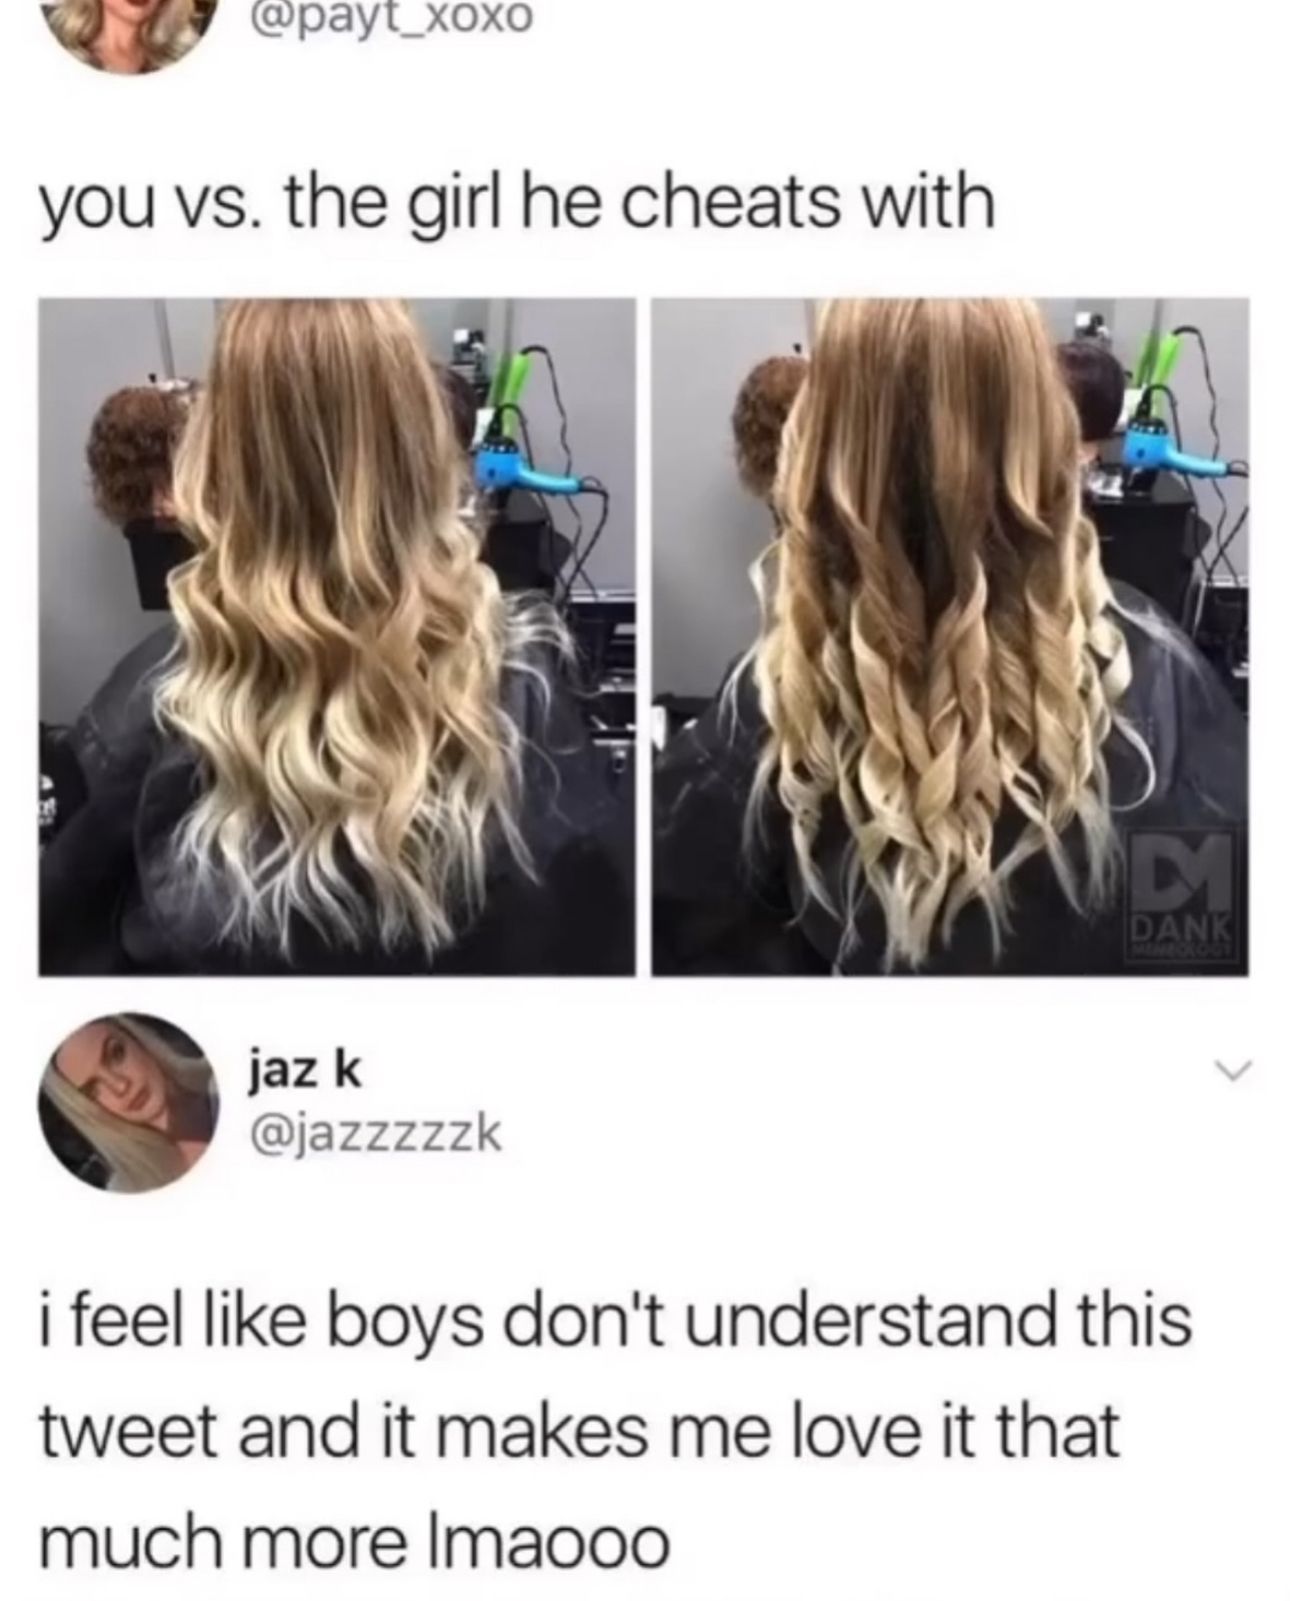 you vs the girl he cheats - you vs. the girl he cheats with M Dank jaz k i feel boys don't understand this tweet and it makes me love it that much more Imaooo